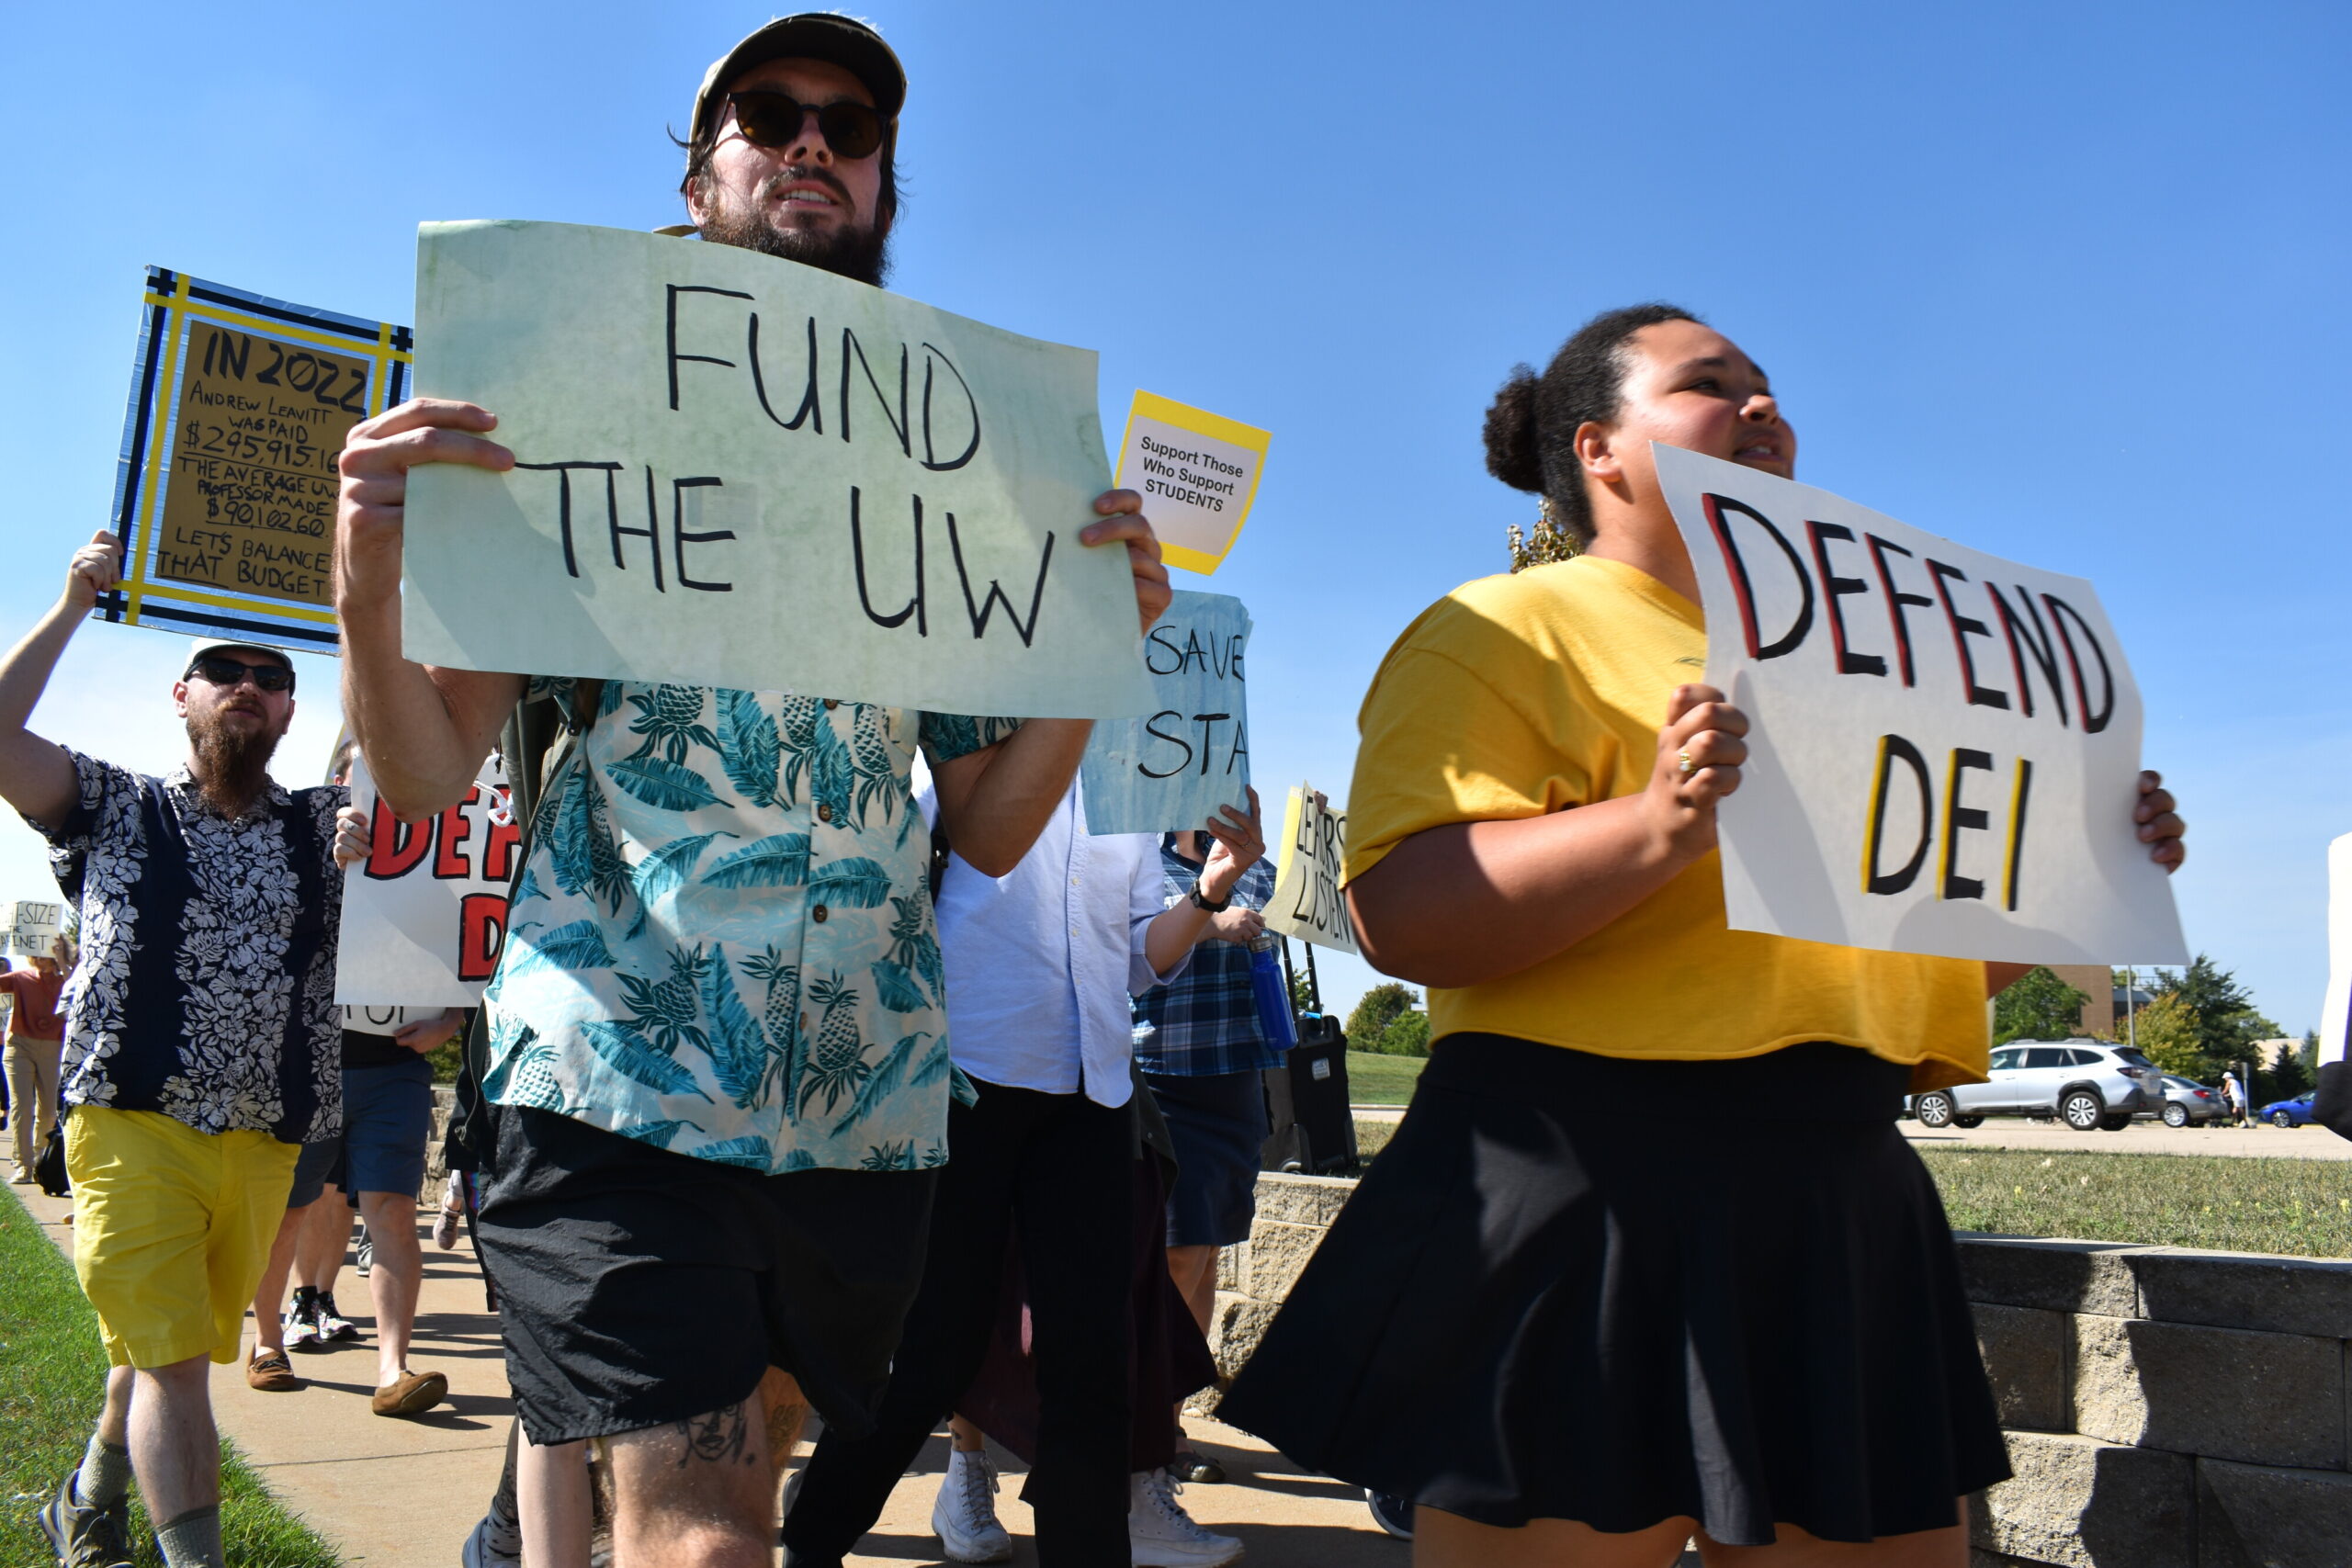 ‘Put students first’: Dozens gather to protest UW-Oshkosh plan to cut 200 positions